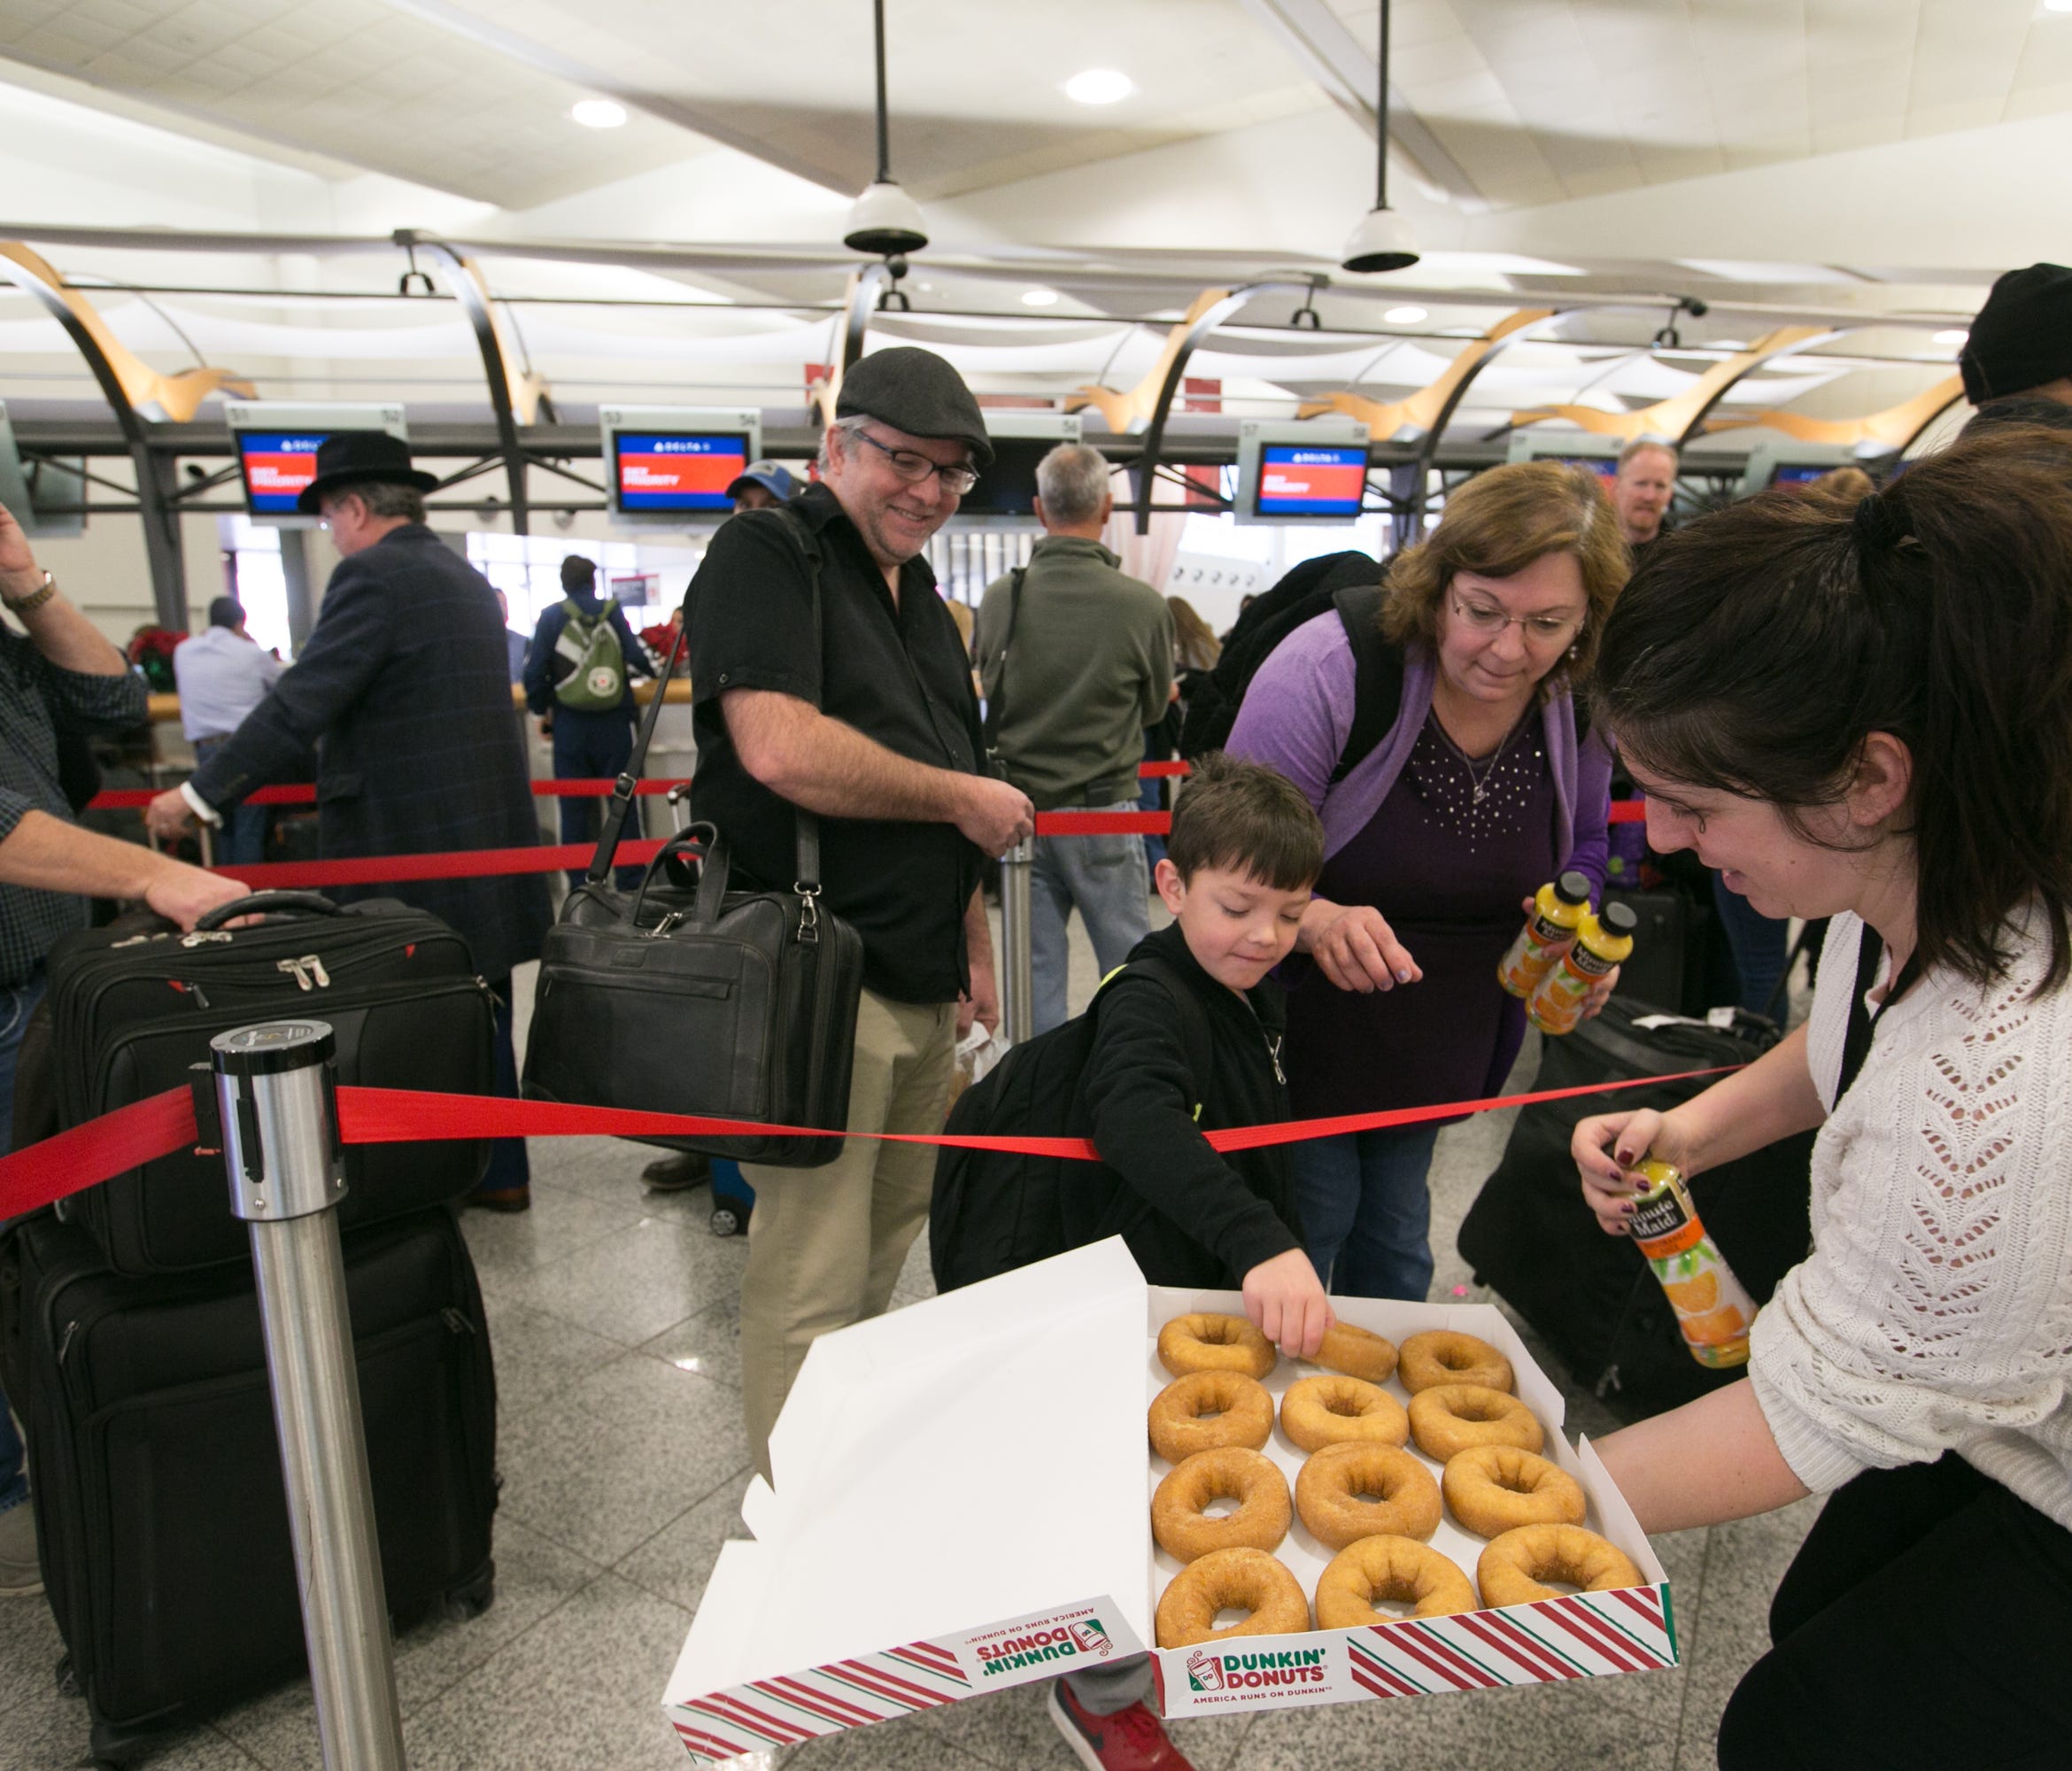 A Delta employee passes out doughnuts and juice to passengers at Hartsfield-Jackson Atlanta International Airport on Dec. 18, 2017. Hundreds of flights were cancelled after a power outage at the airport.